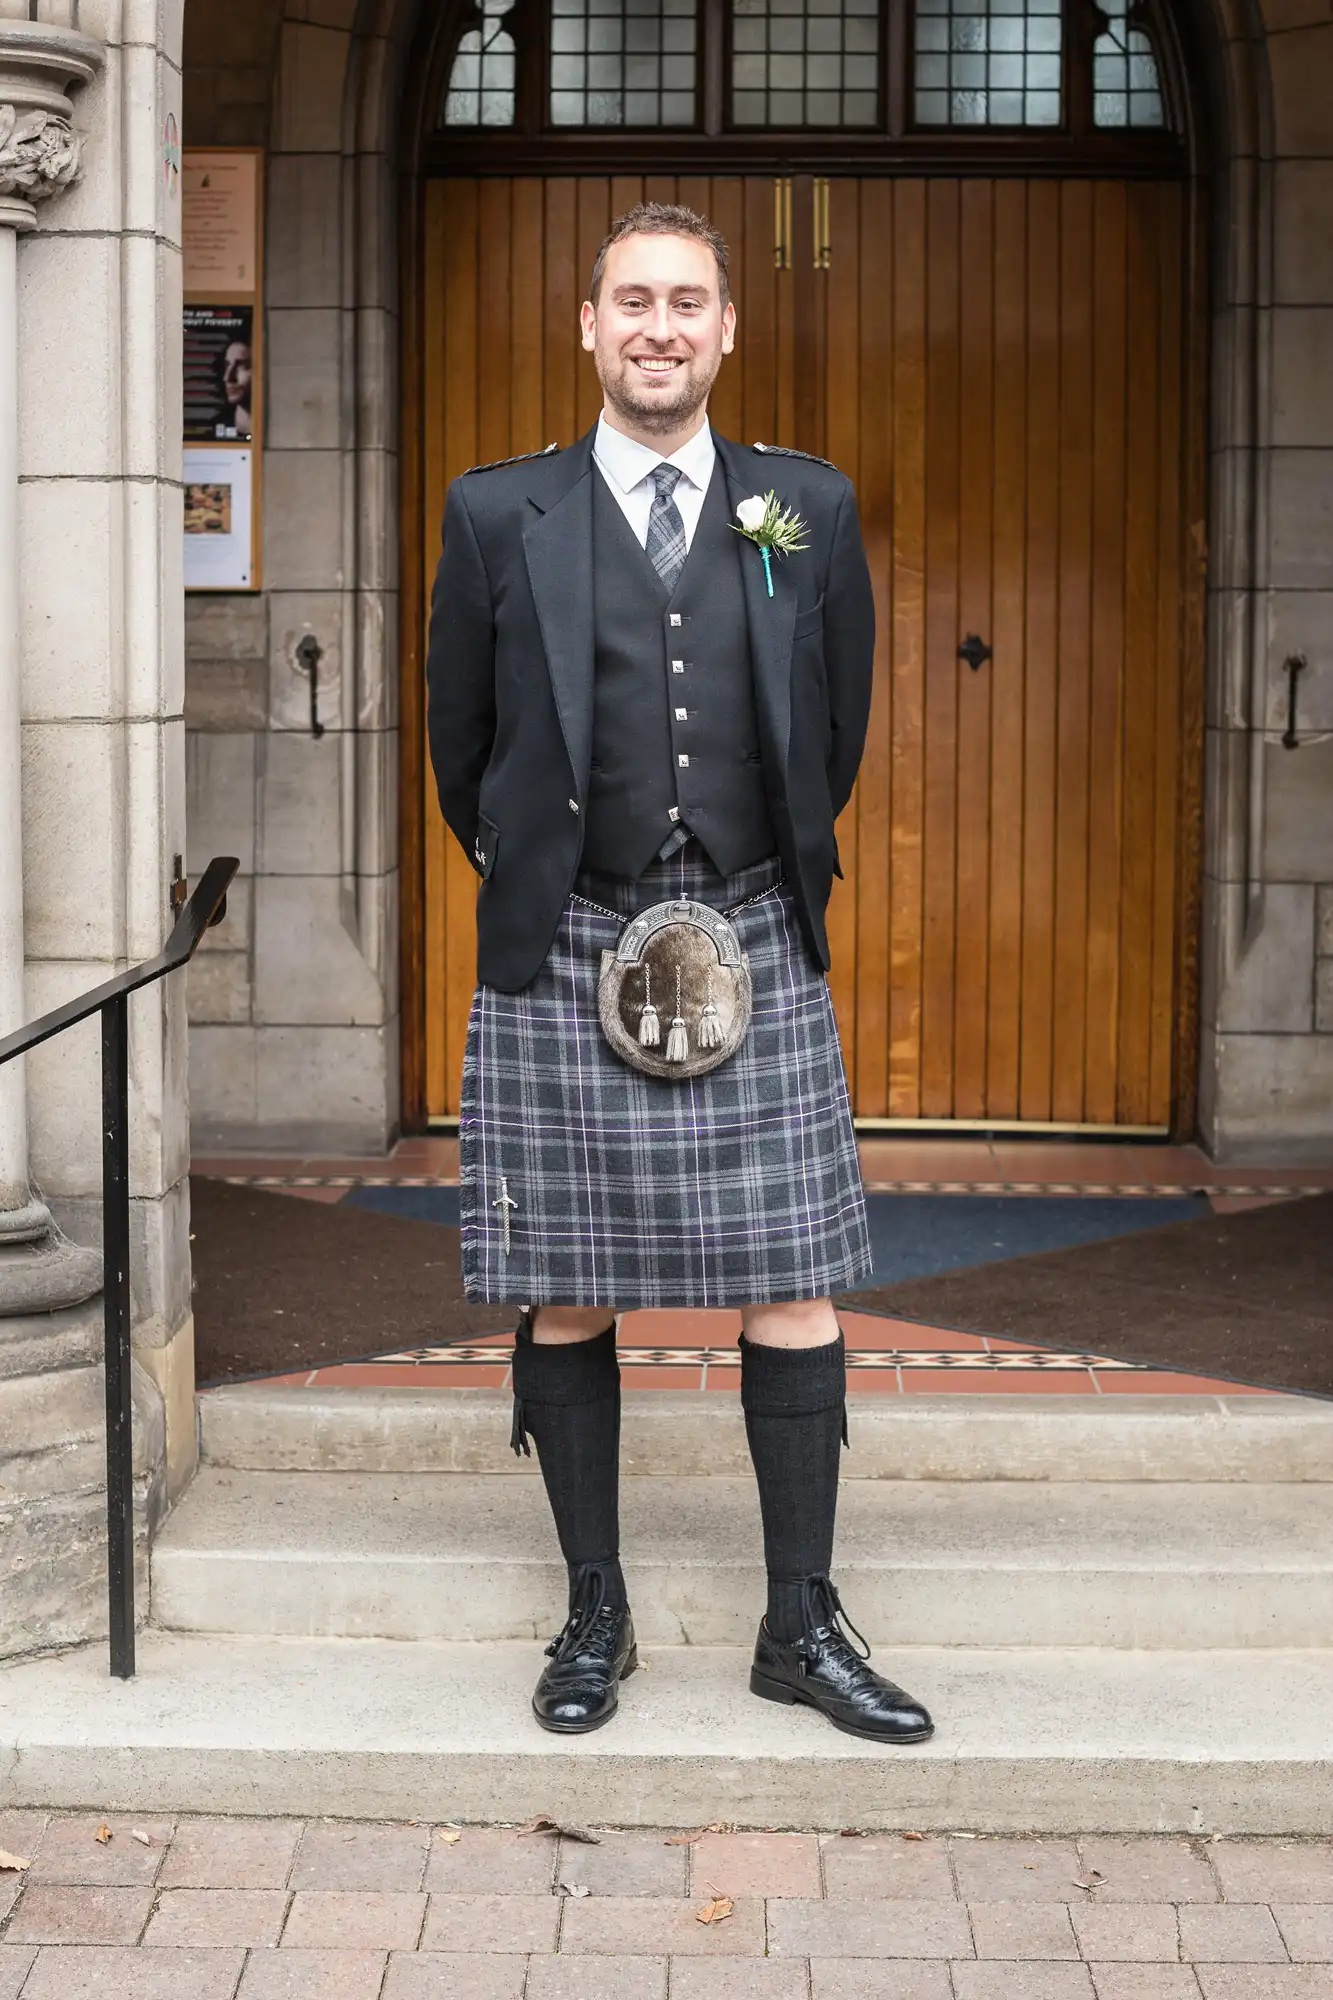 Man in traditional scottish attire smiling, standing in front of a building entrance. he wears a kilt, sporran, and a jacket with a boutonniere.